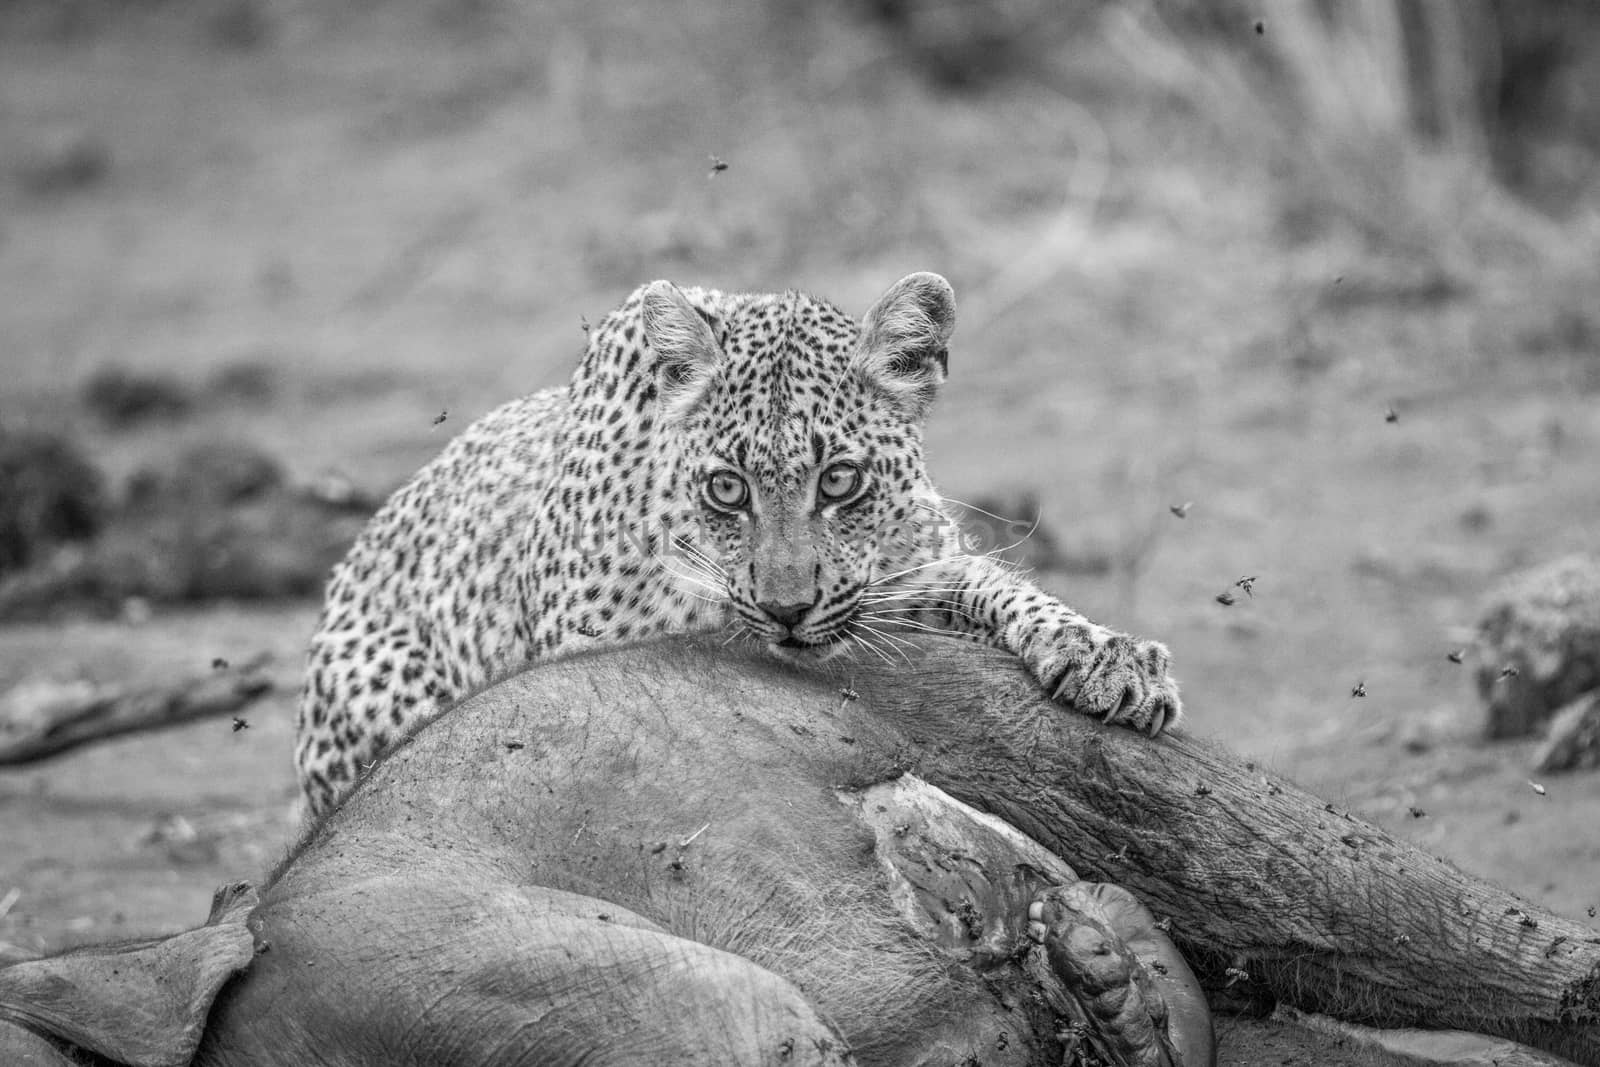 Leopard feeding from a baby Elephant carcass in black and white in the Kruger National Park, South Africa.